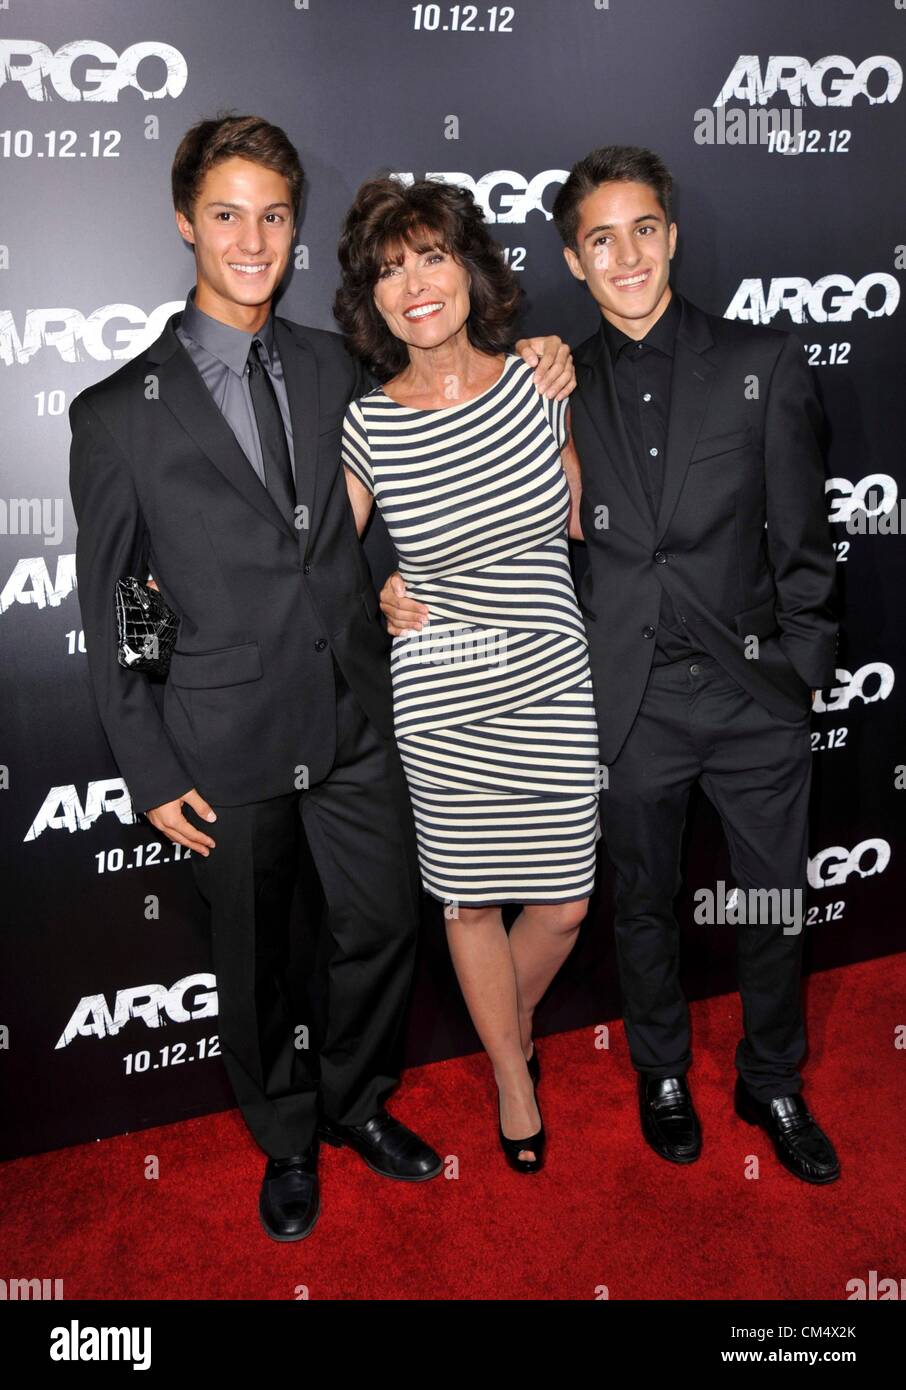 Adrienne Barbeau, sons at arrivals for ARGO Premiere, The Academy of Motion Pictures Arts and Sciences  (AMPAS), Beverly Hills, CA October 4, 2012. Photo By: Elizabeth Goodenough/Everett Collection Stock Photo